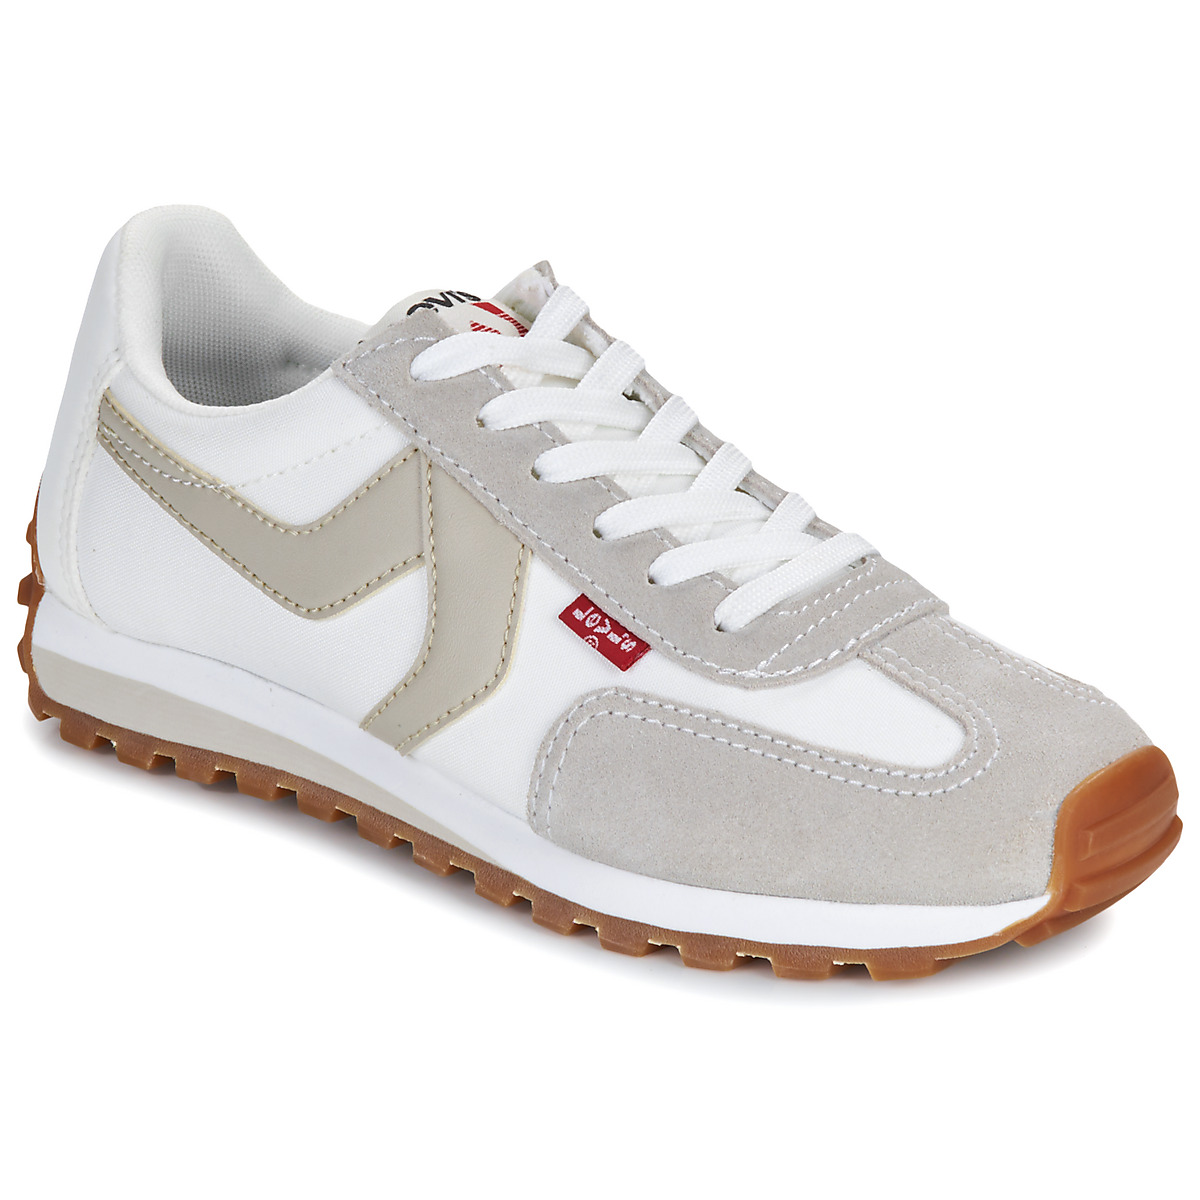 Levi's Stryder Red Tab S White